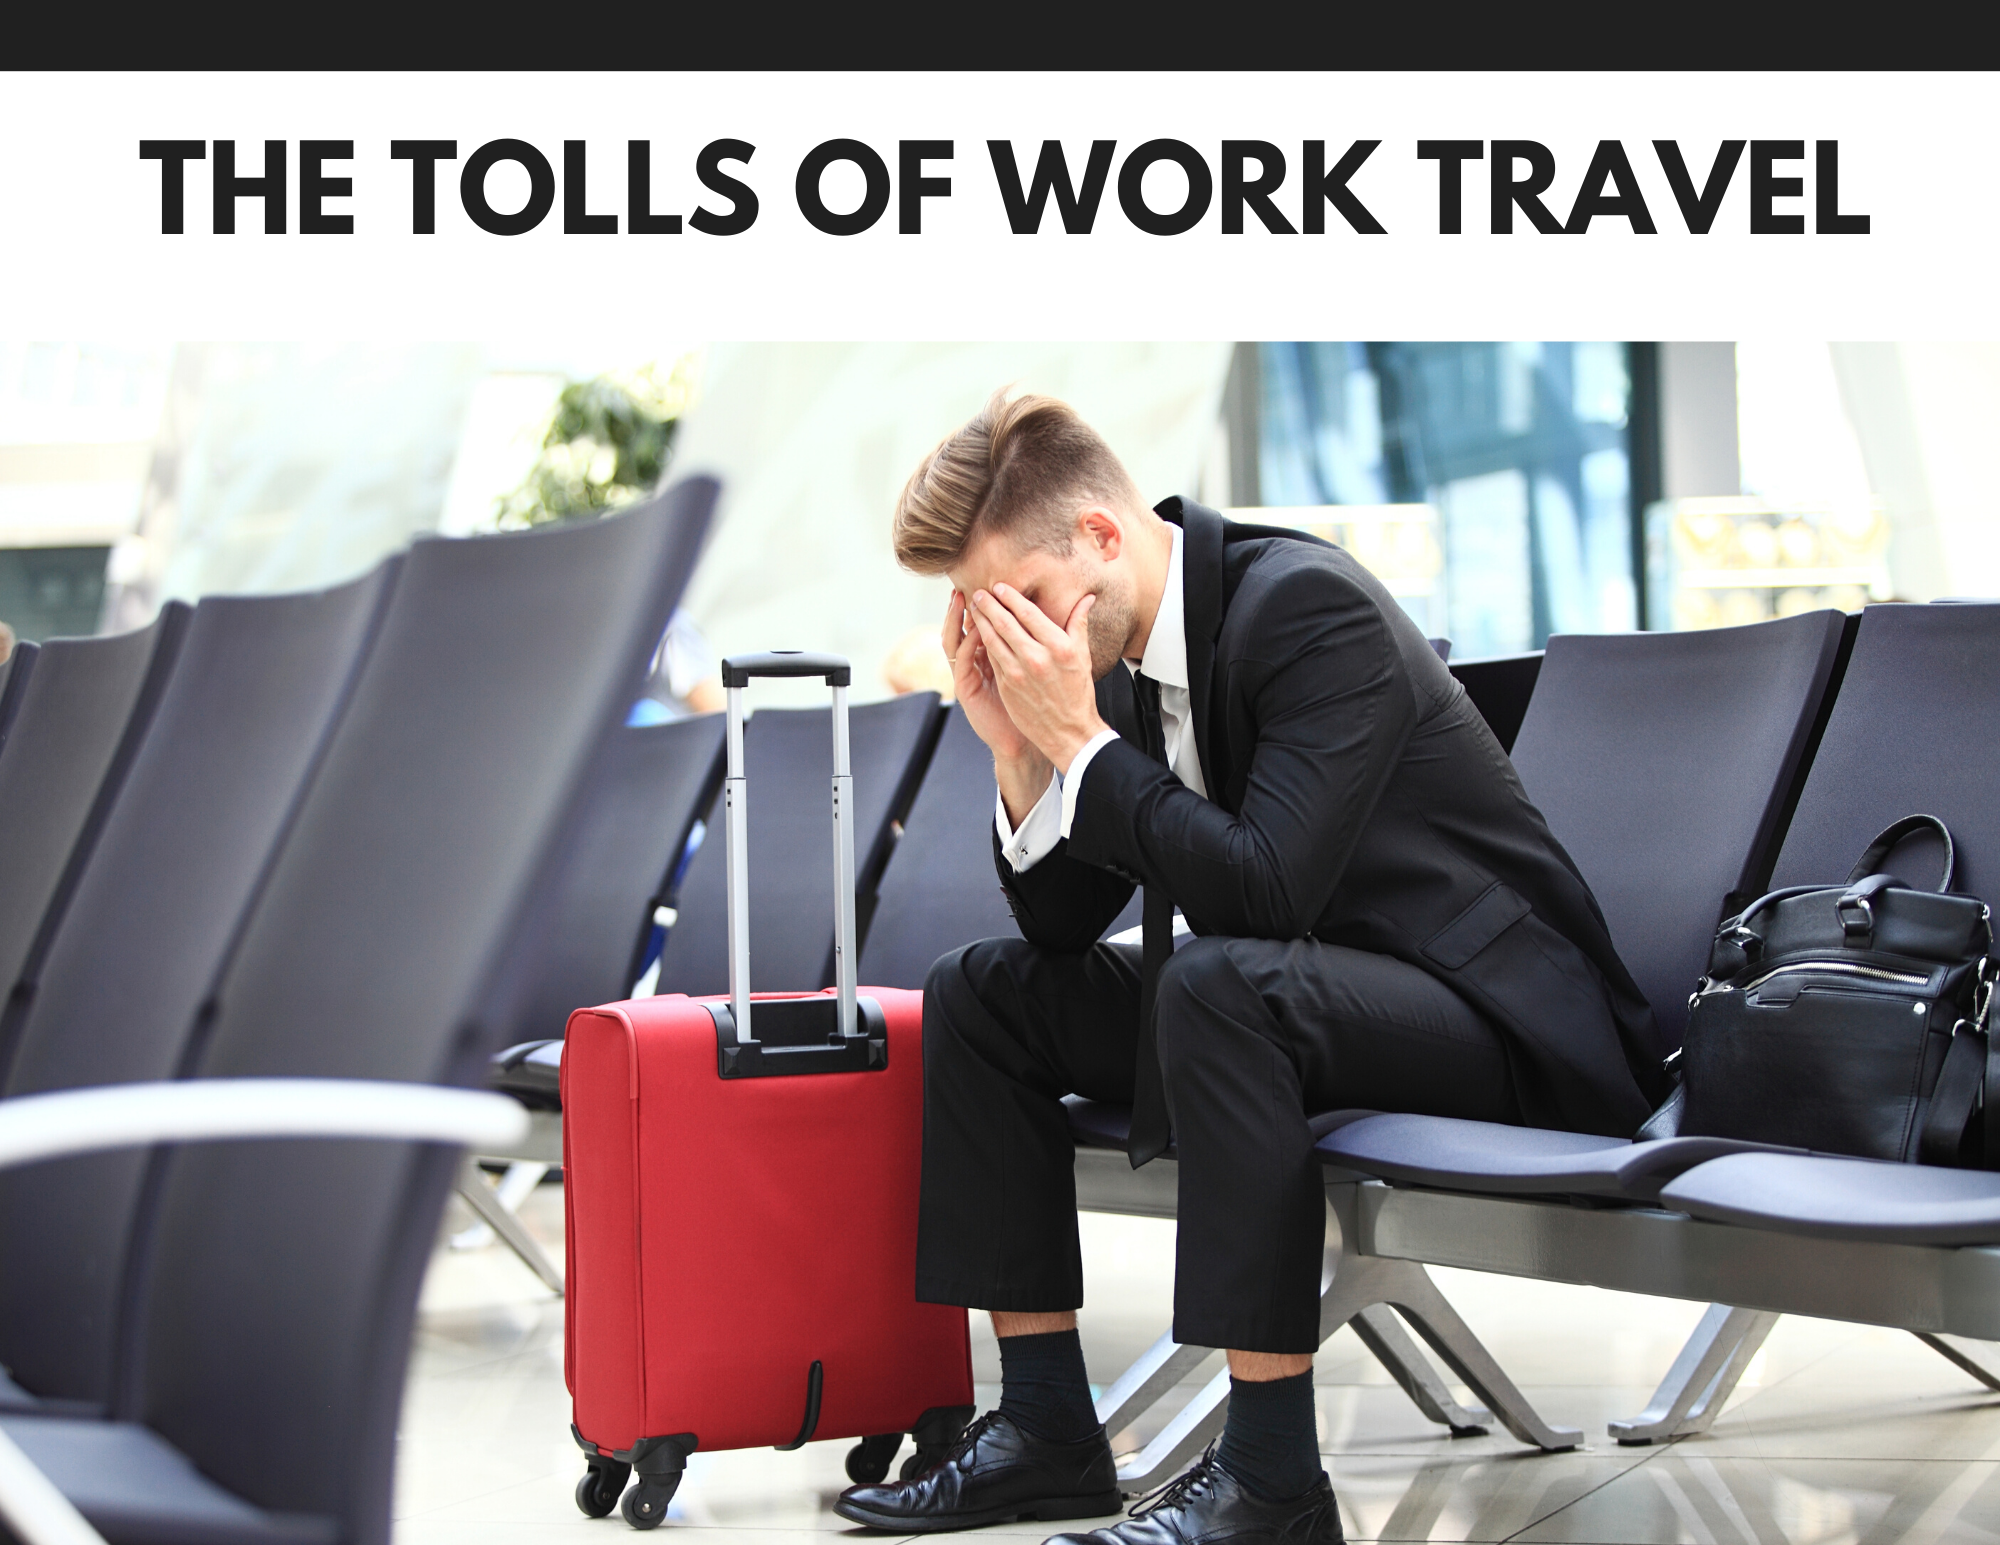 work travel time meaning